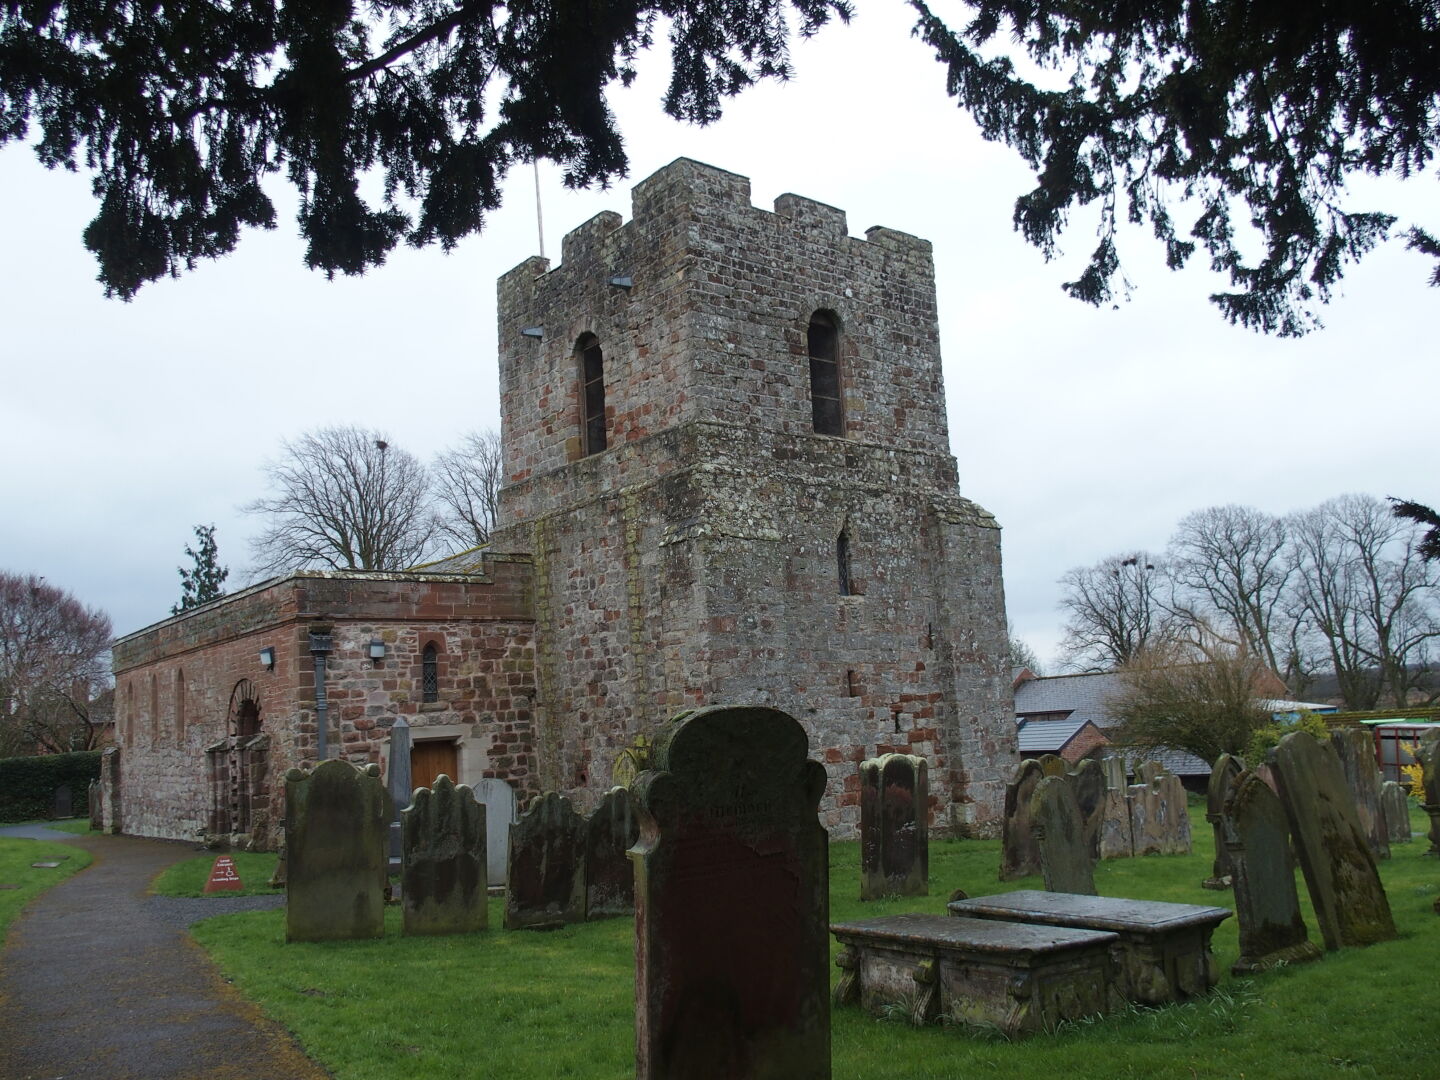 The Church of St. Michael in Burgh-by-Sands.